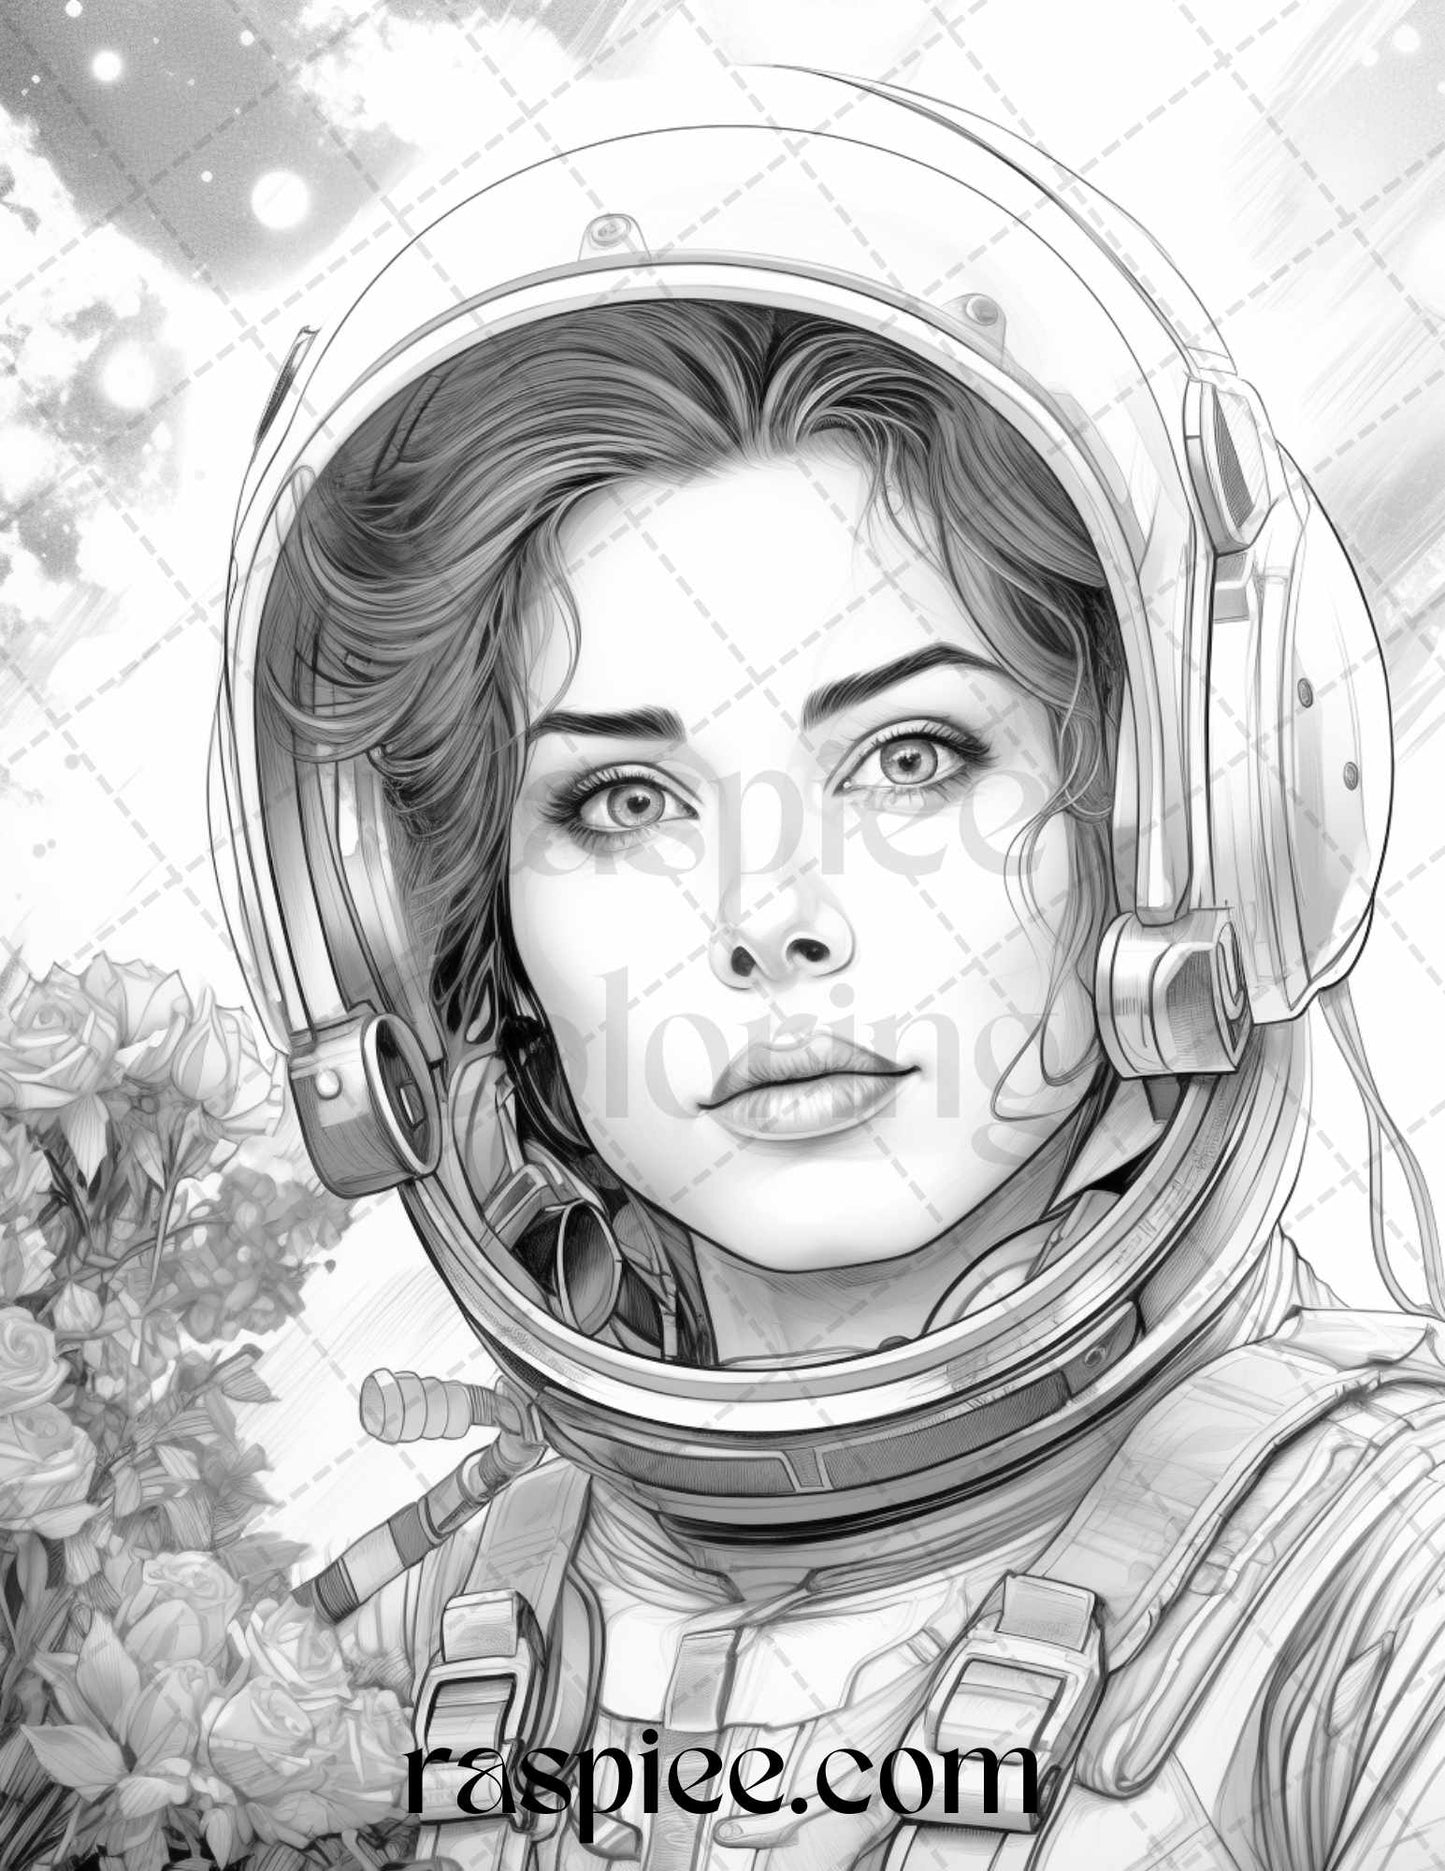 Astronaut girl coloring page, Adult stress-relief coloring sheet, Printable space coloring page, Detailed sci-fi coloring print, Relaxing celestial coloring page, Galaxy-inspired coloring sheet, Mindful coloring for adults